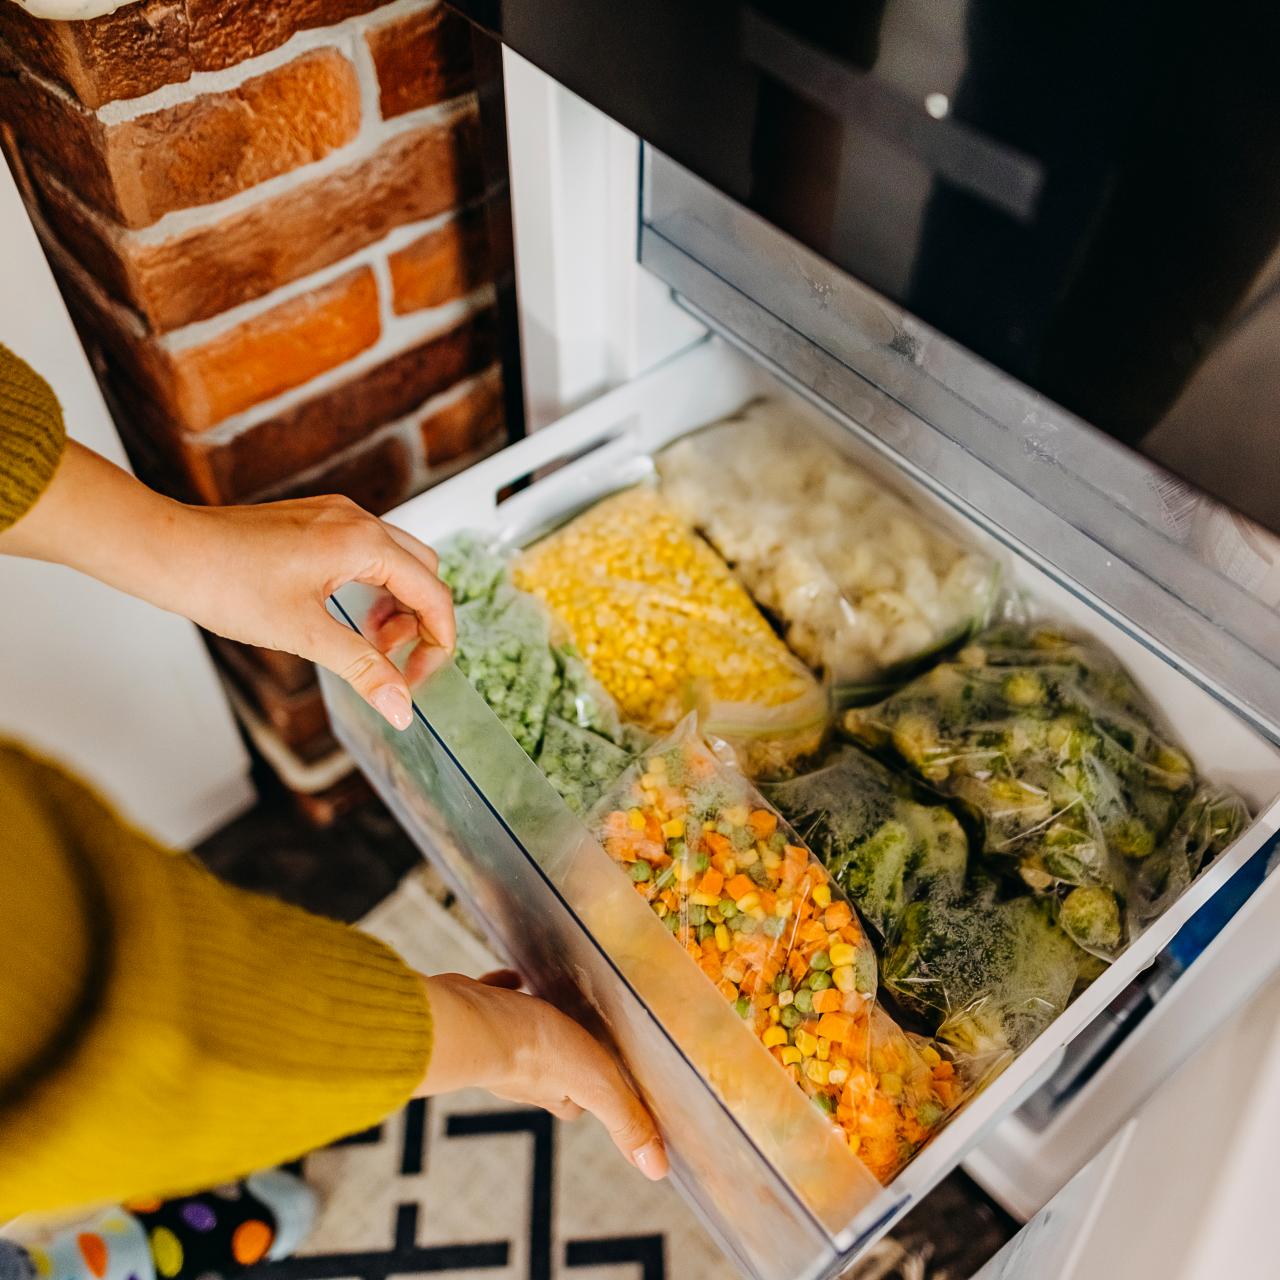 Best Food to Keep In the Freezer — How to Stock a Freezer